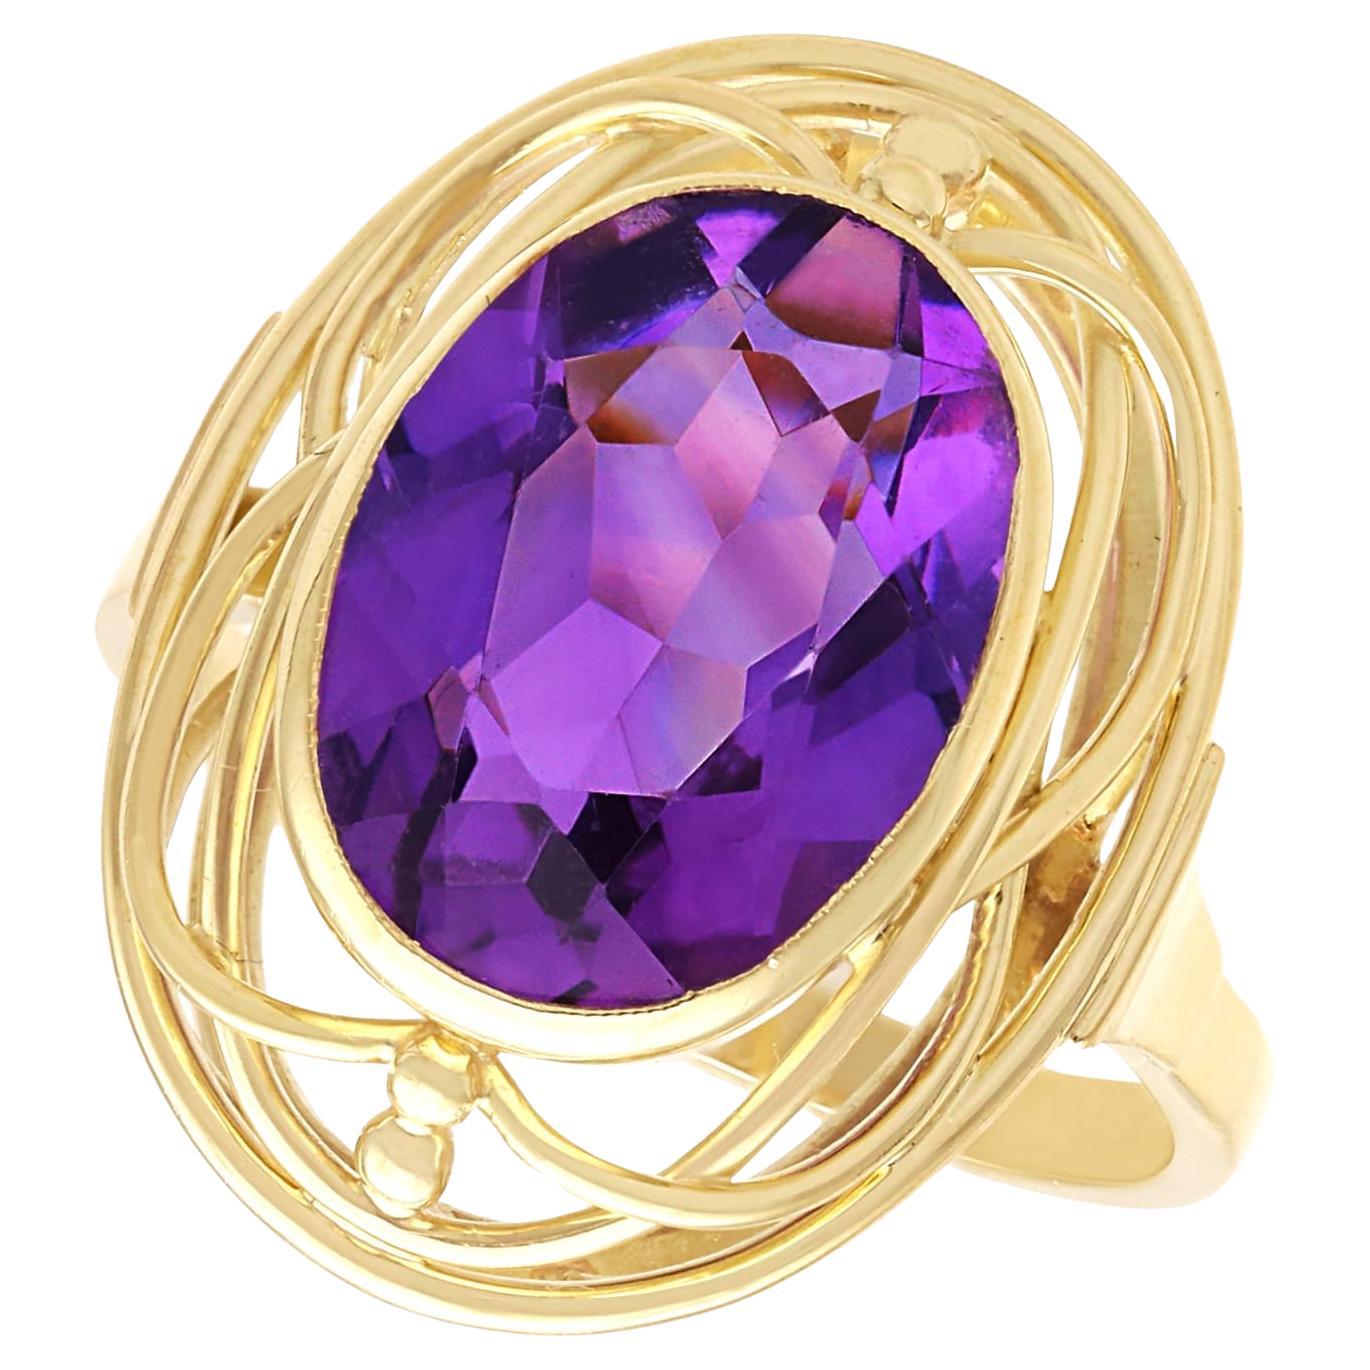 Vintage 6.91Ct Amethyst and 14k Yellow Gold Dress Ring 1940 For Sale